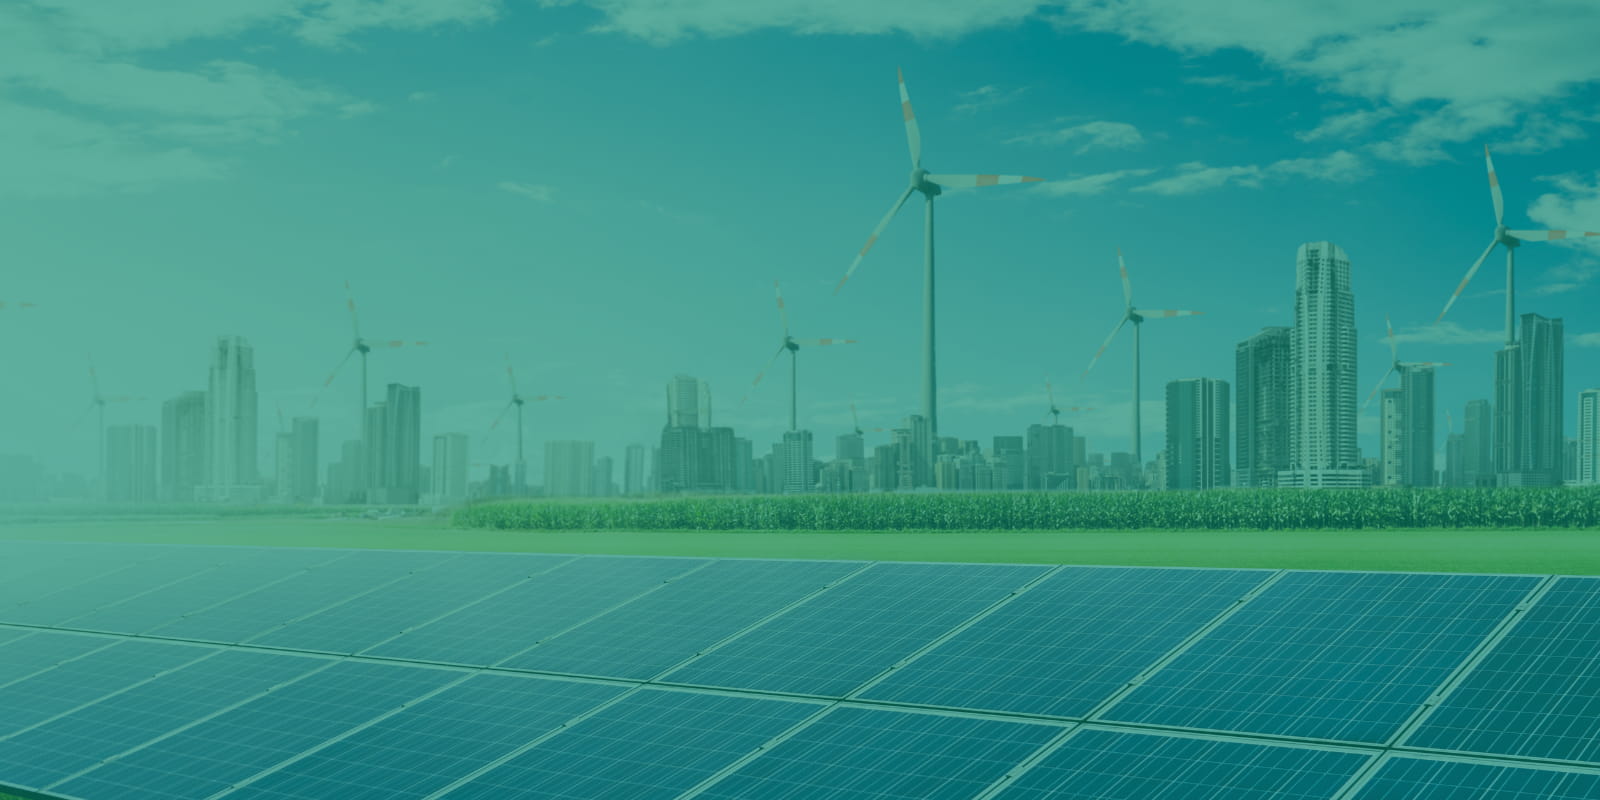 Opportunities & Challenges Of Setting Up A Renewable Energy Company In The Uae